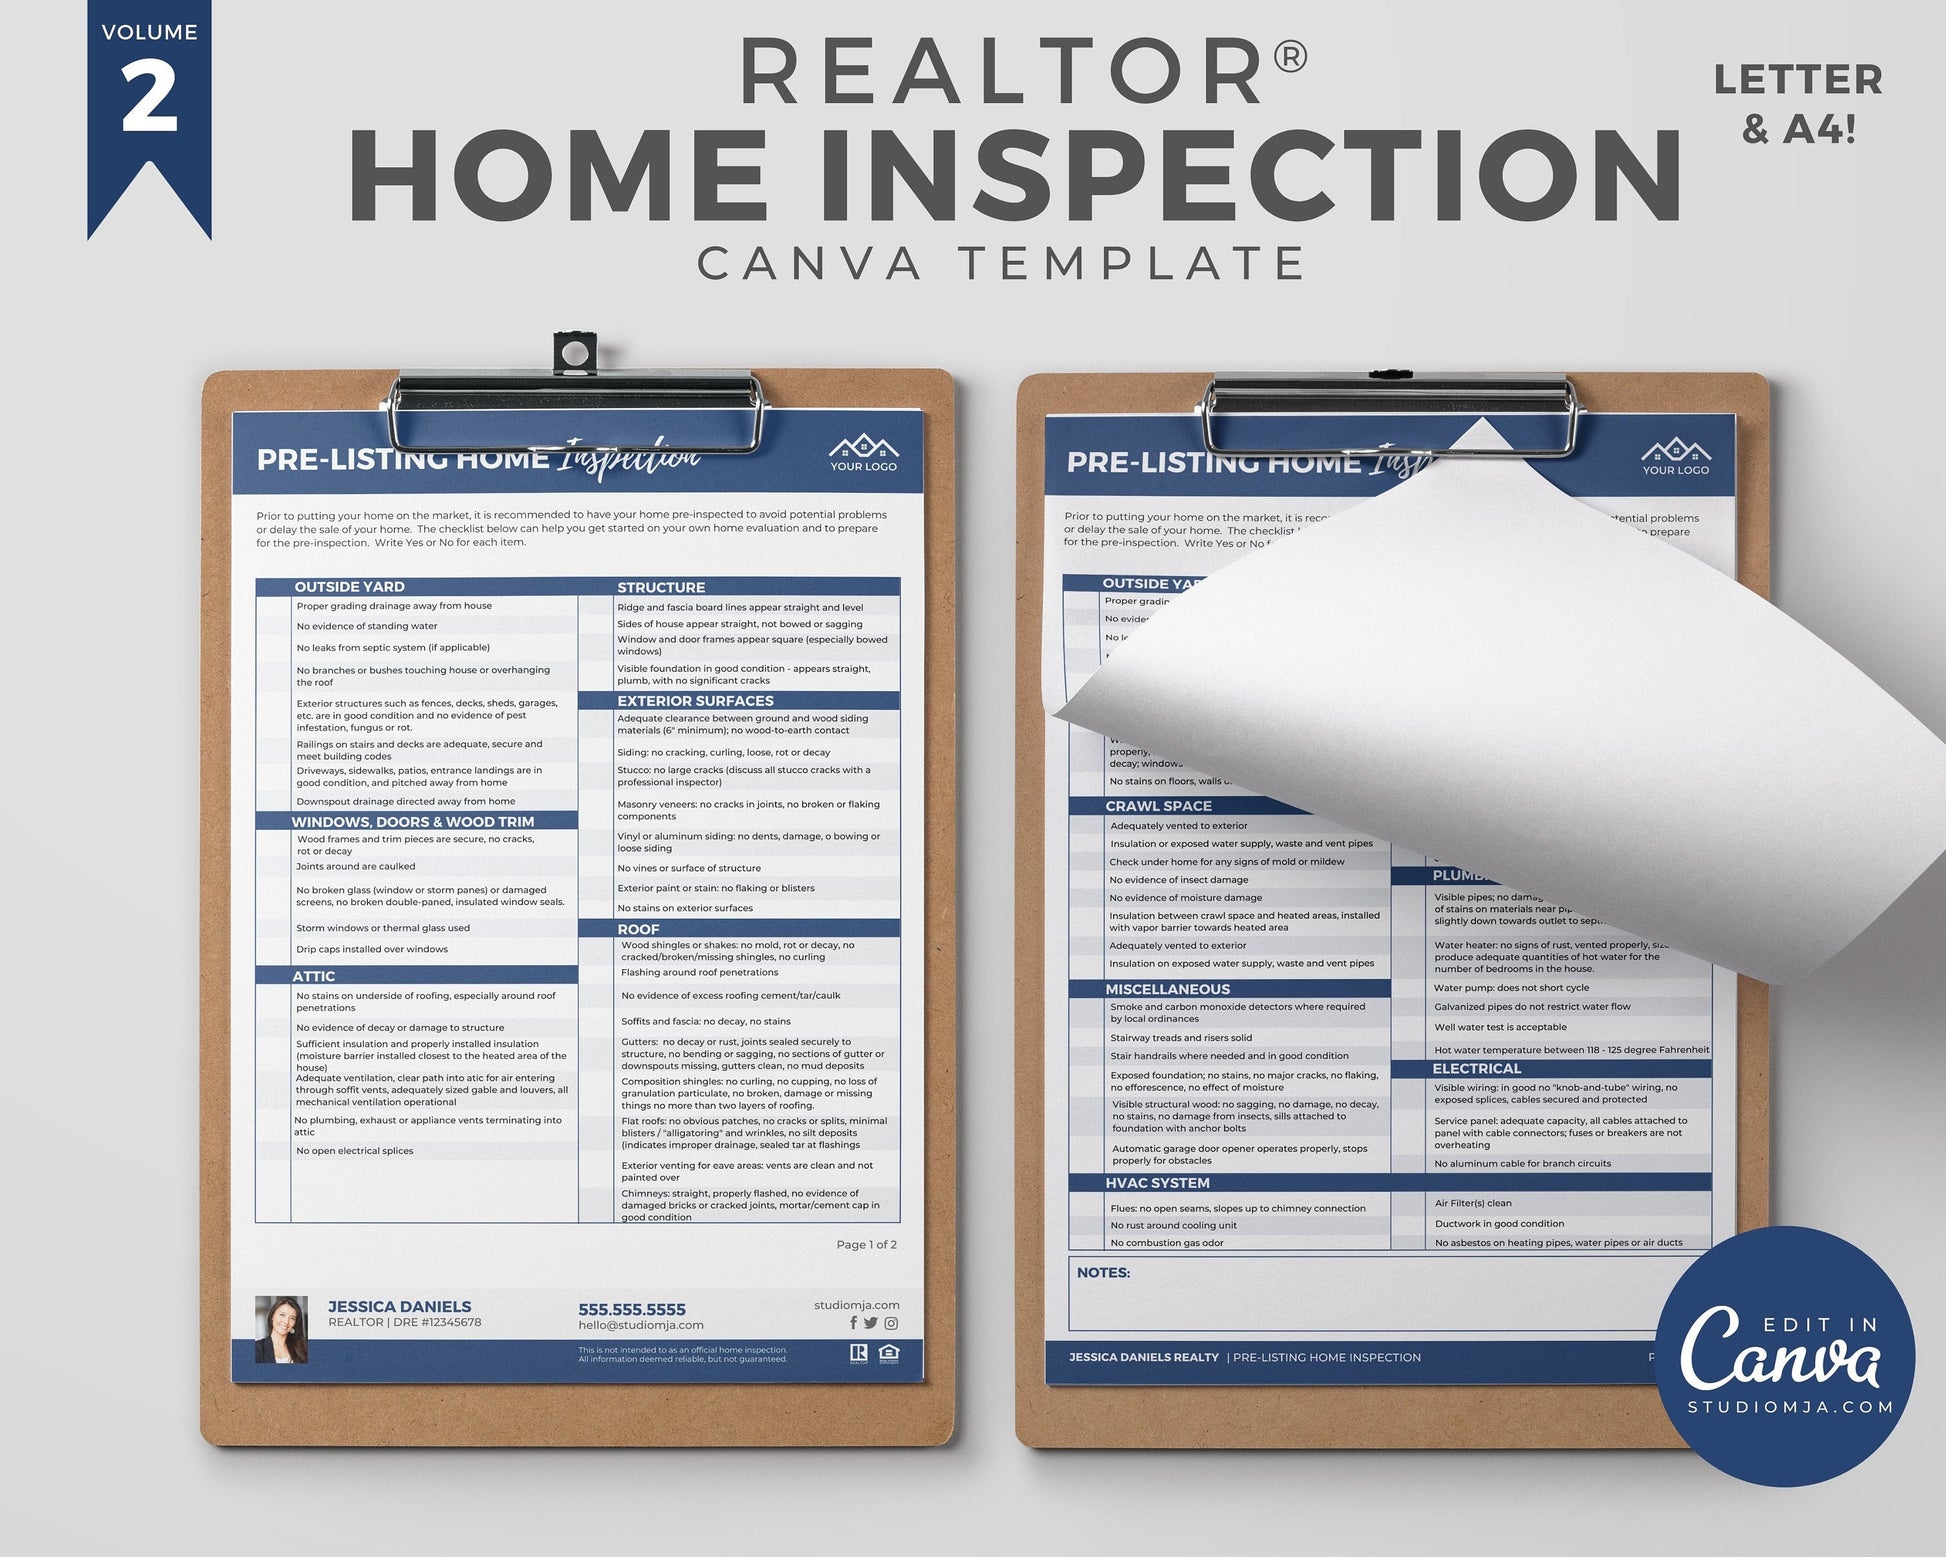 Real Estate Home Inspection Checklist, Real Estate Marketing, Printable Checklist, Real Estate Seller's Guide, Canva Template, Logo